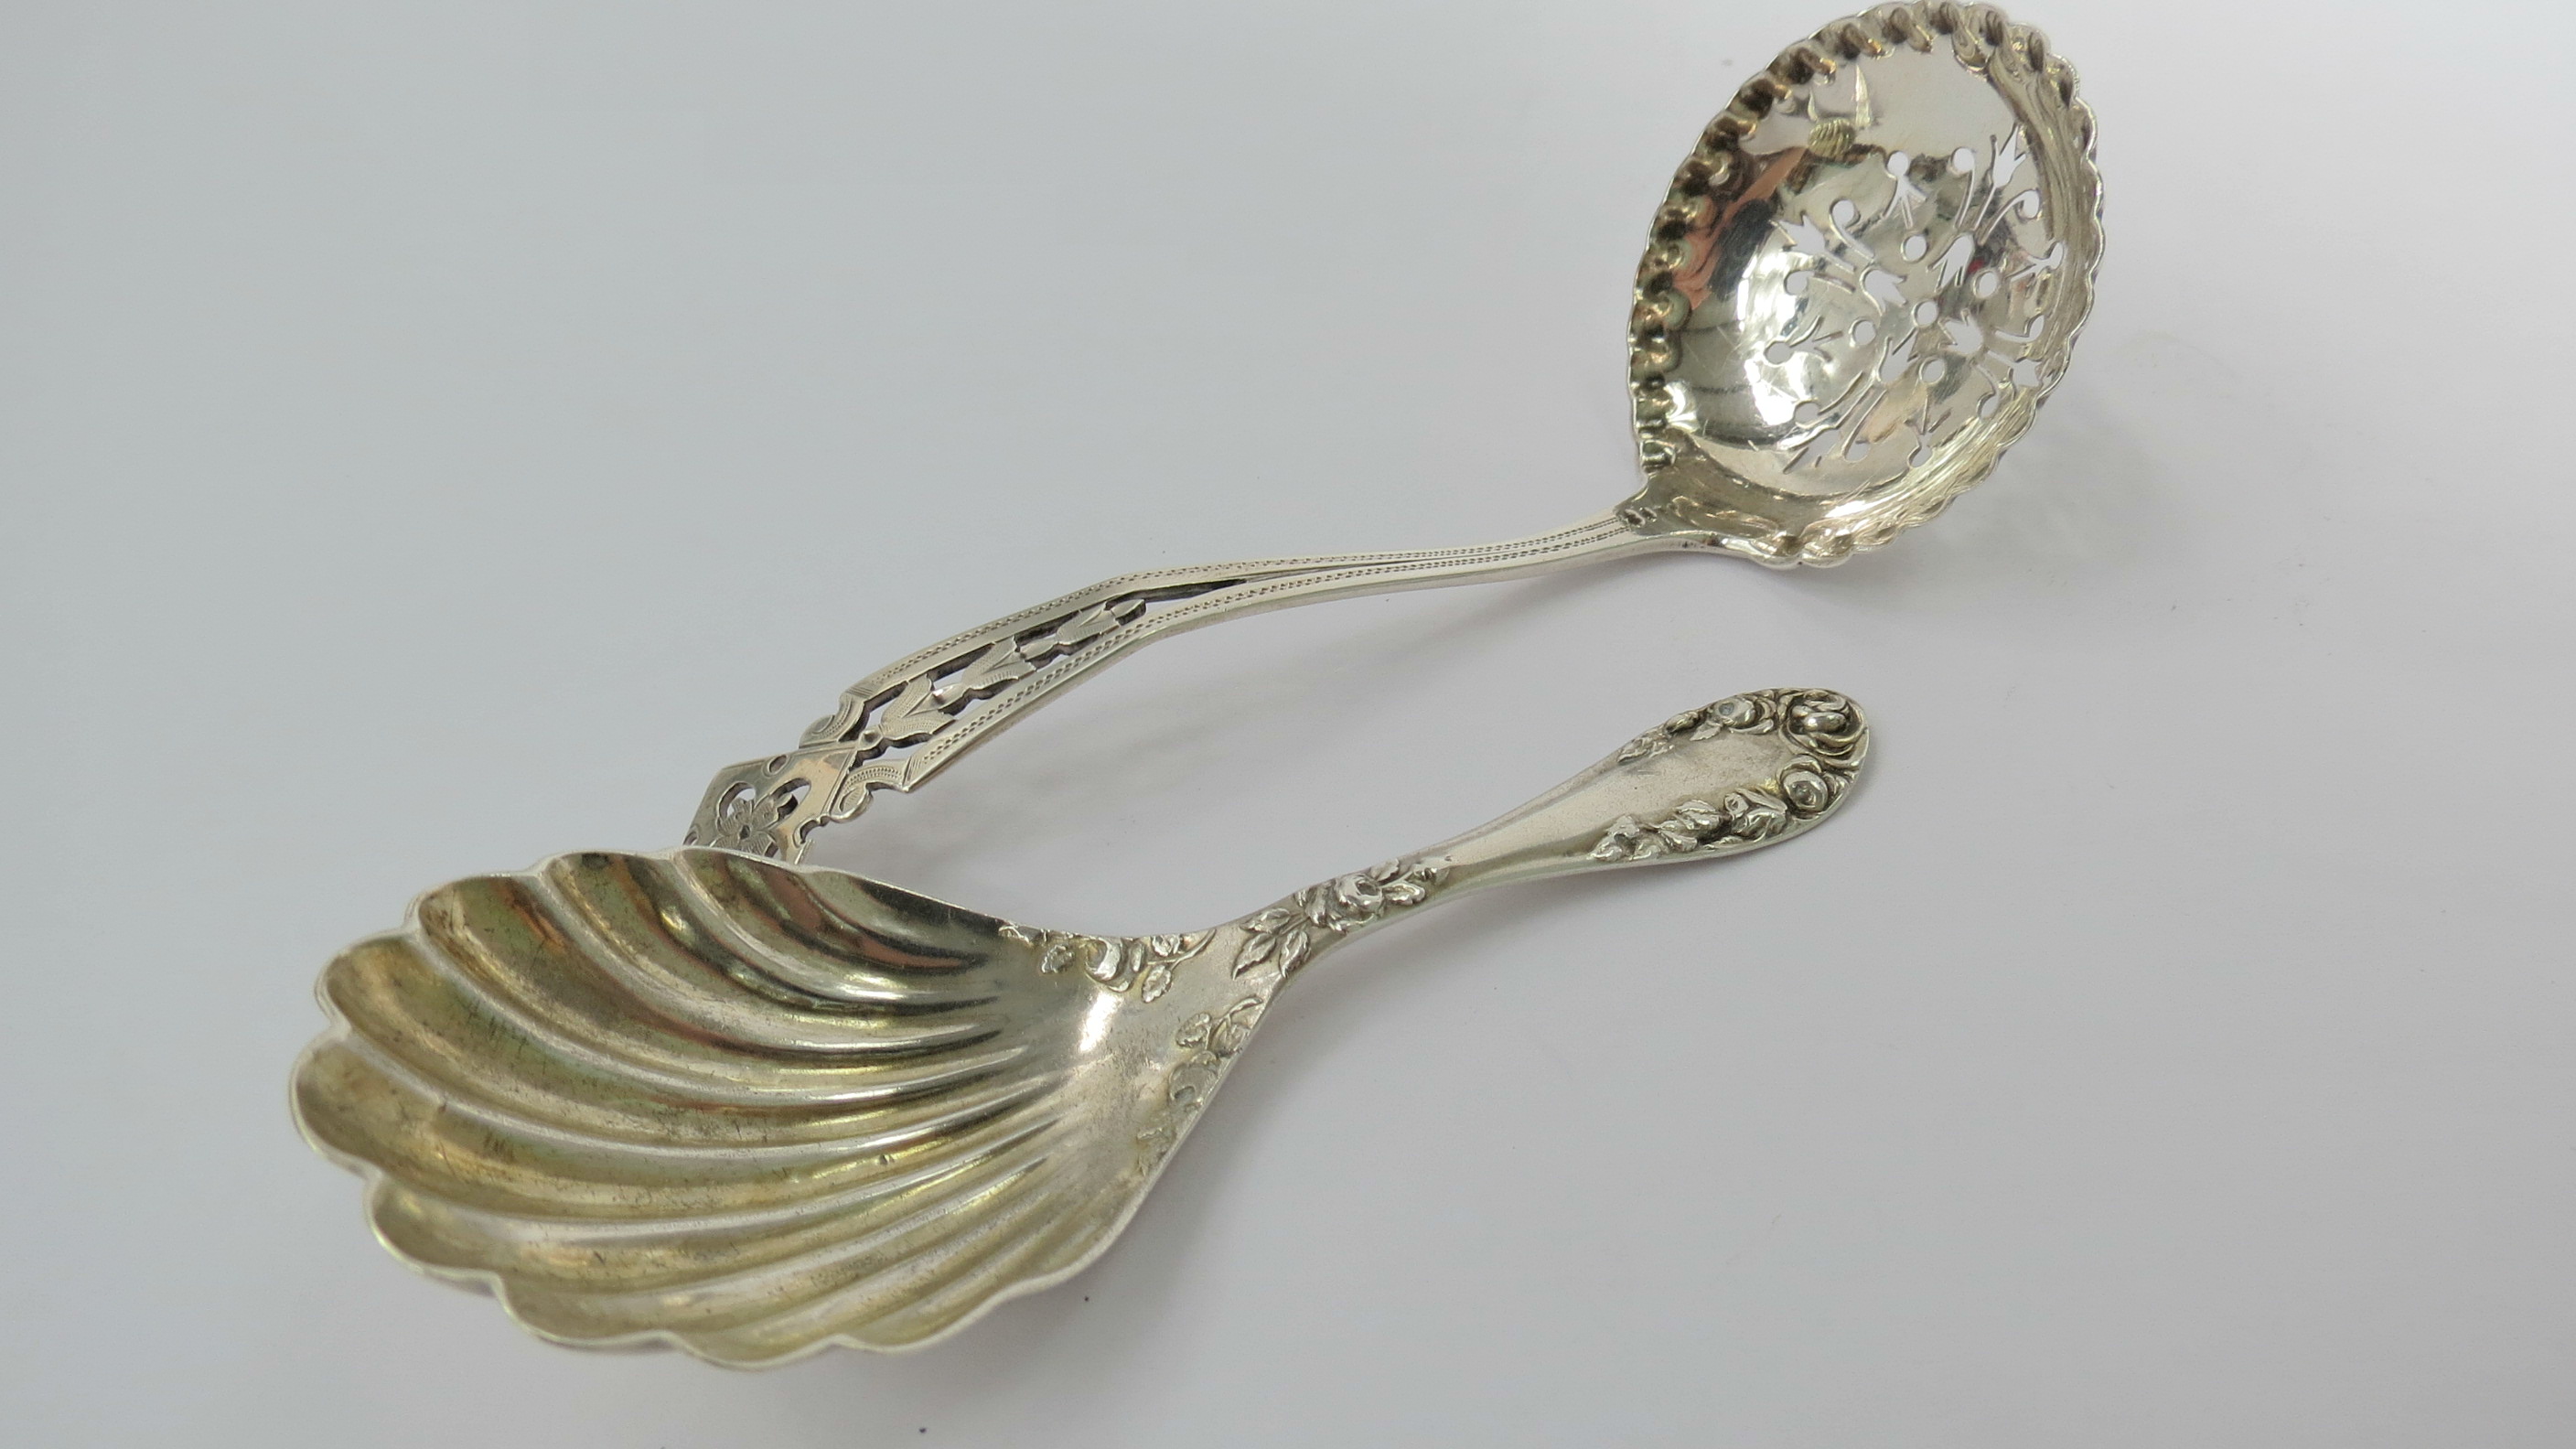 A silver sifter spoon, Brewis & Co, Sheffield 1912 with pierced bellflower decoration with a